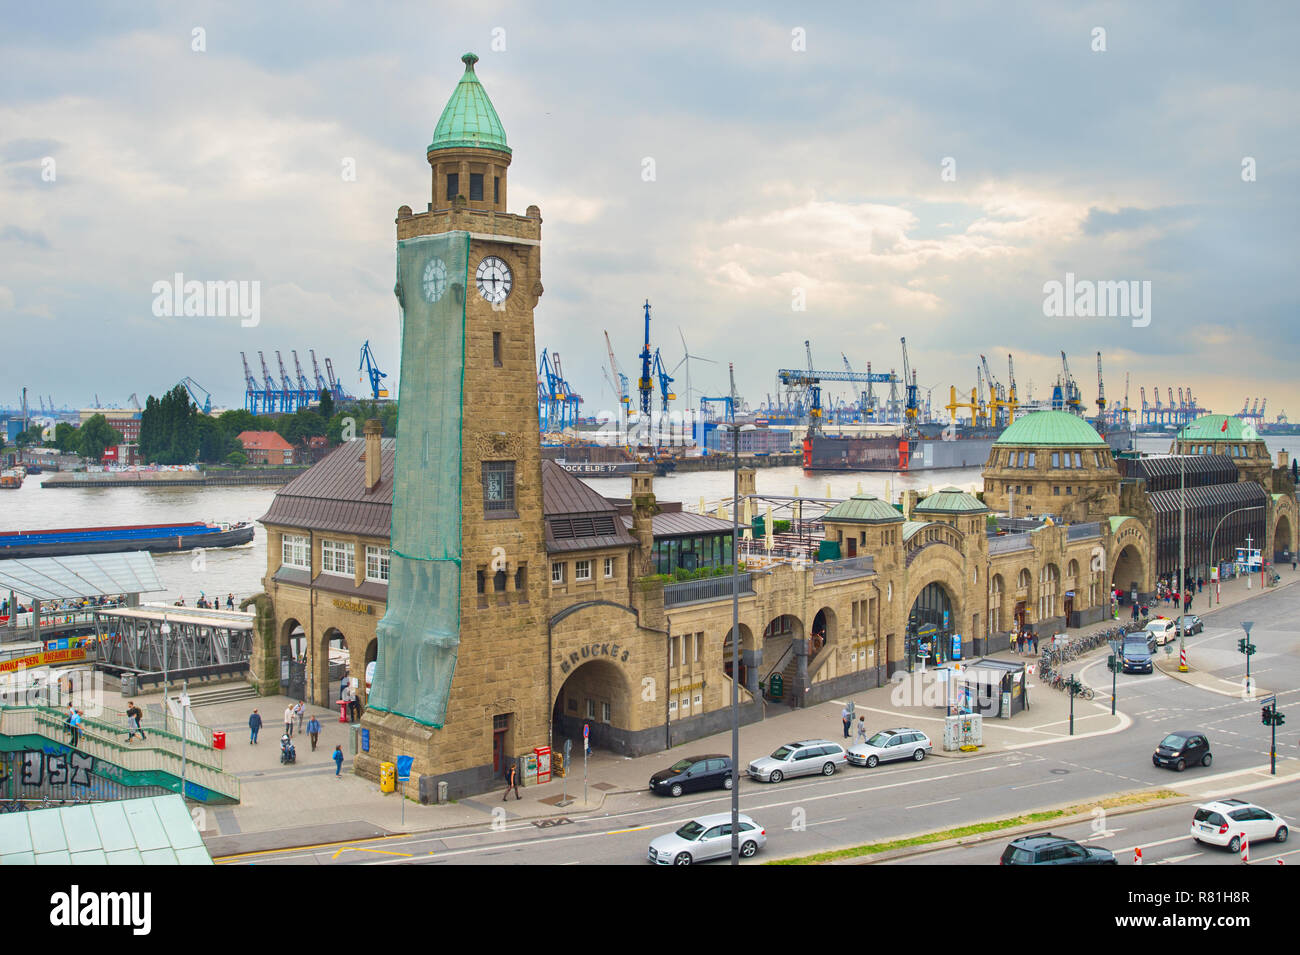 HAMBURG, GERMANY - JUNE 18, 2018: People at Landungsbrücken (the Hamburg's water station). Hamburg is the second-largest city in Germany with a popula Stock Photo